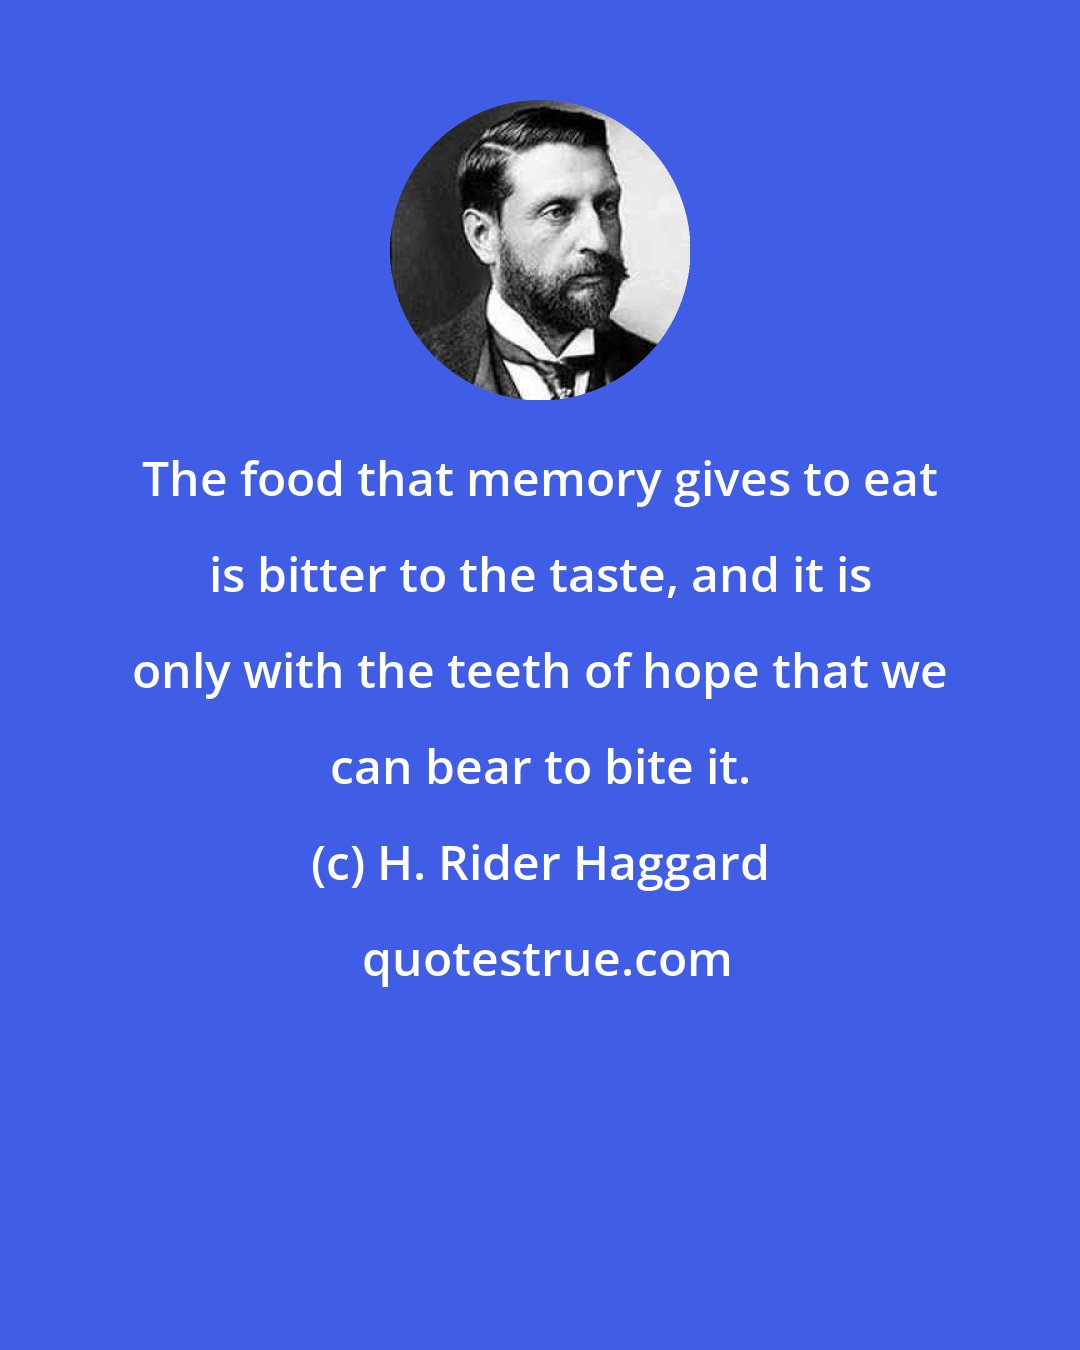 H. Rider Haggard: The food that memory gives to eat is bitter to the taste, and it is only with the teeth of hope that we can bear to bite it.